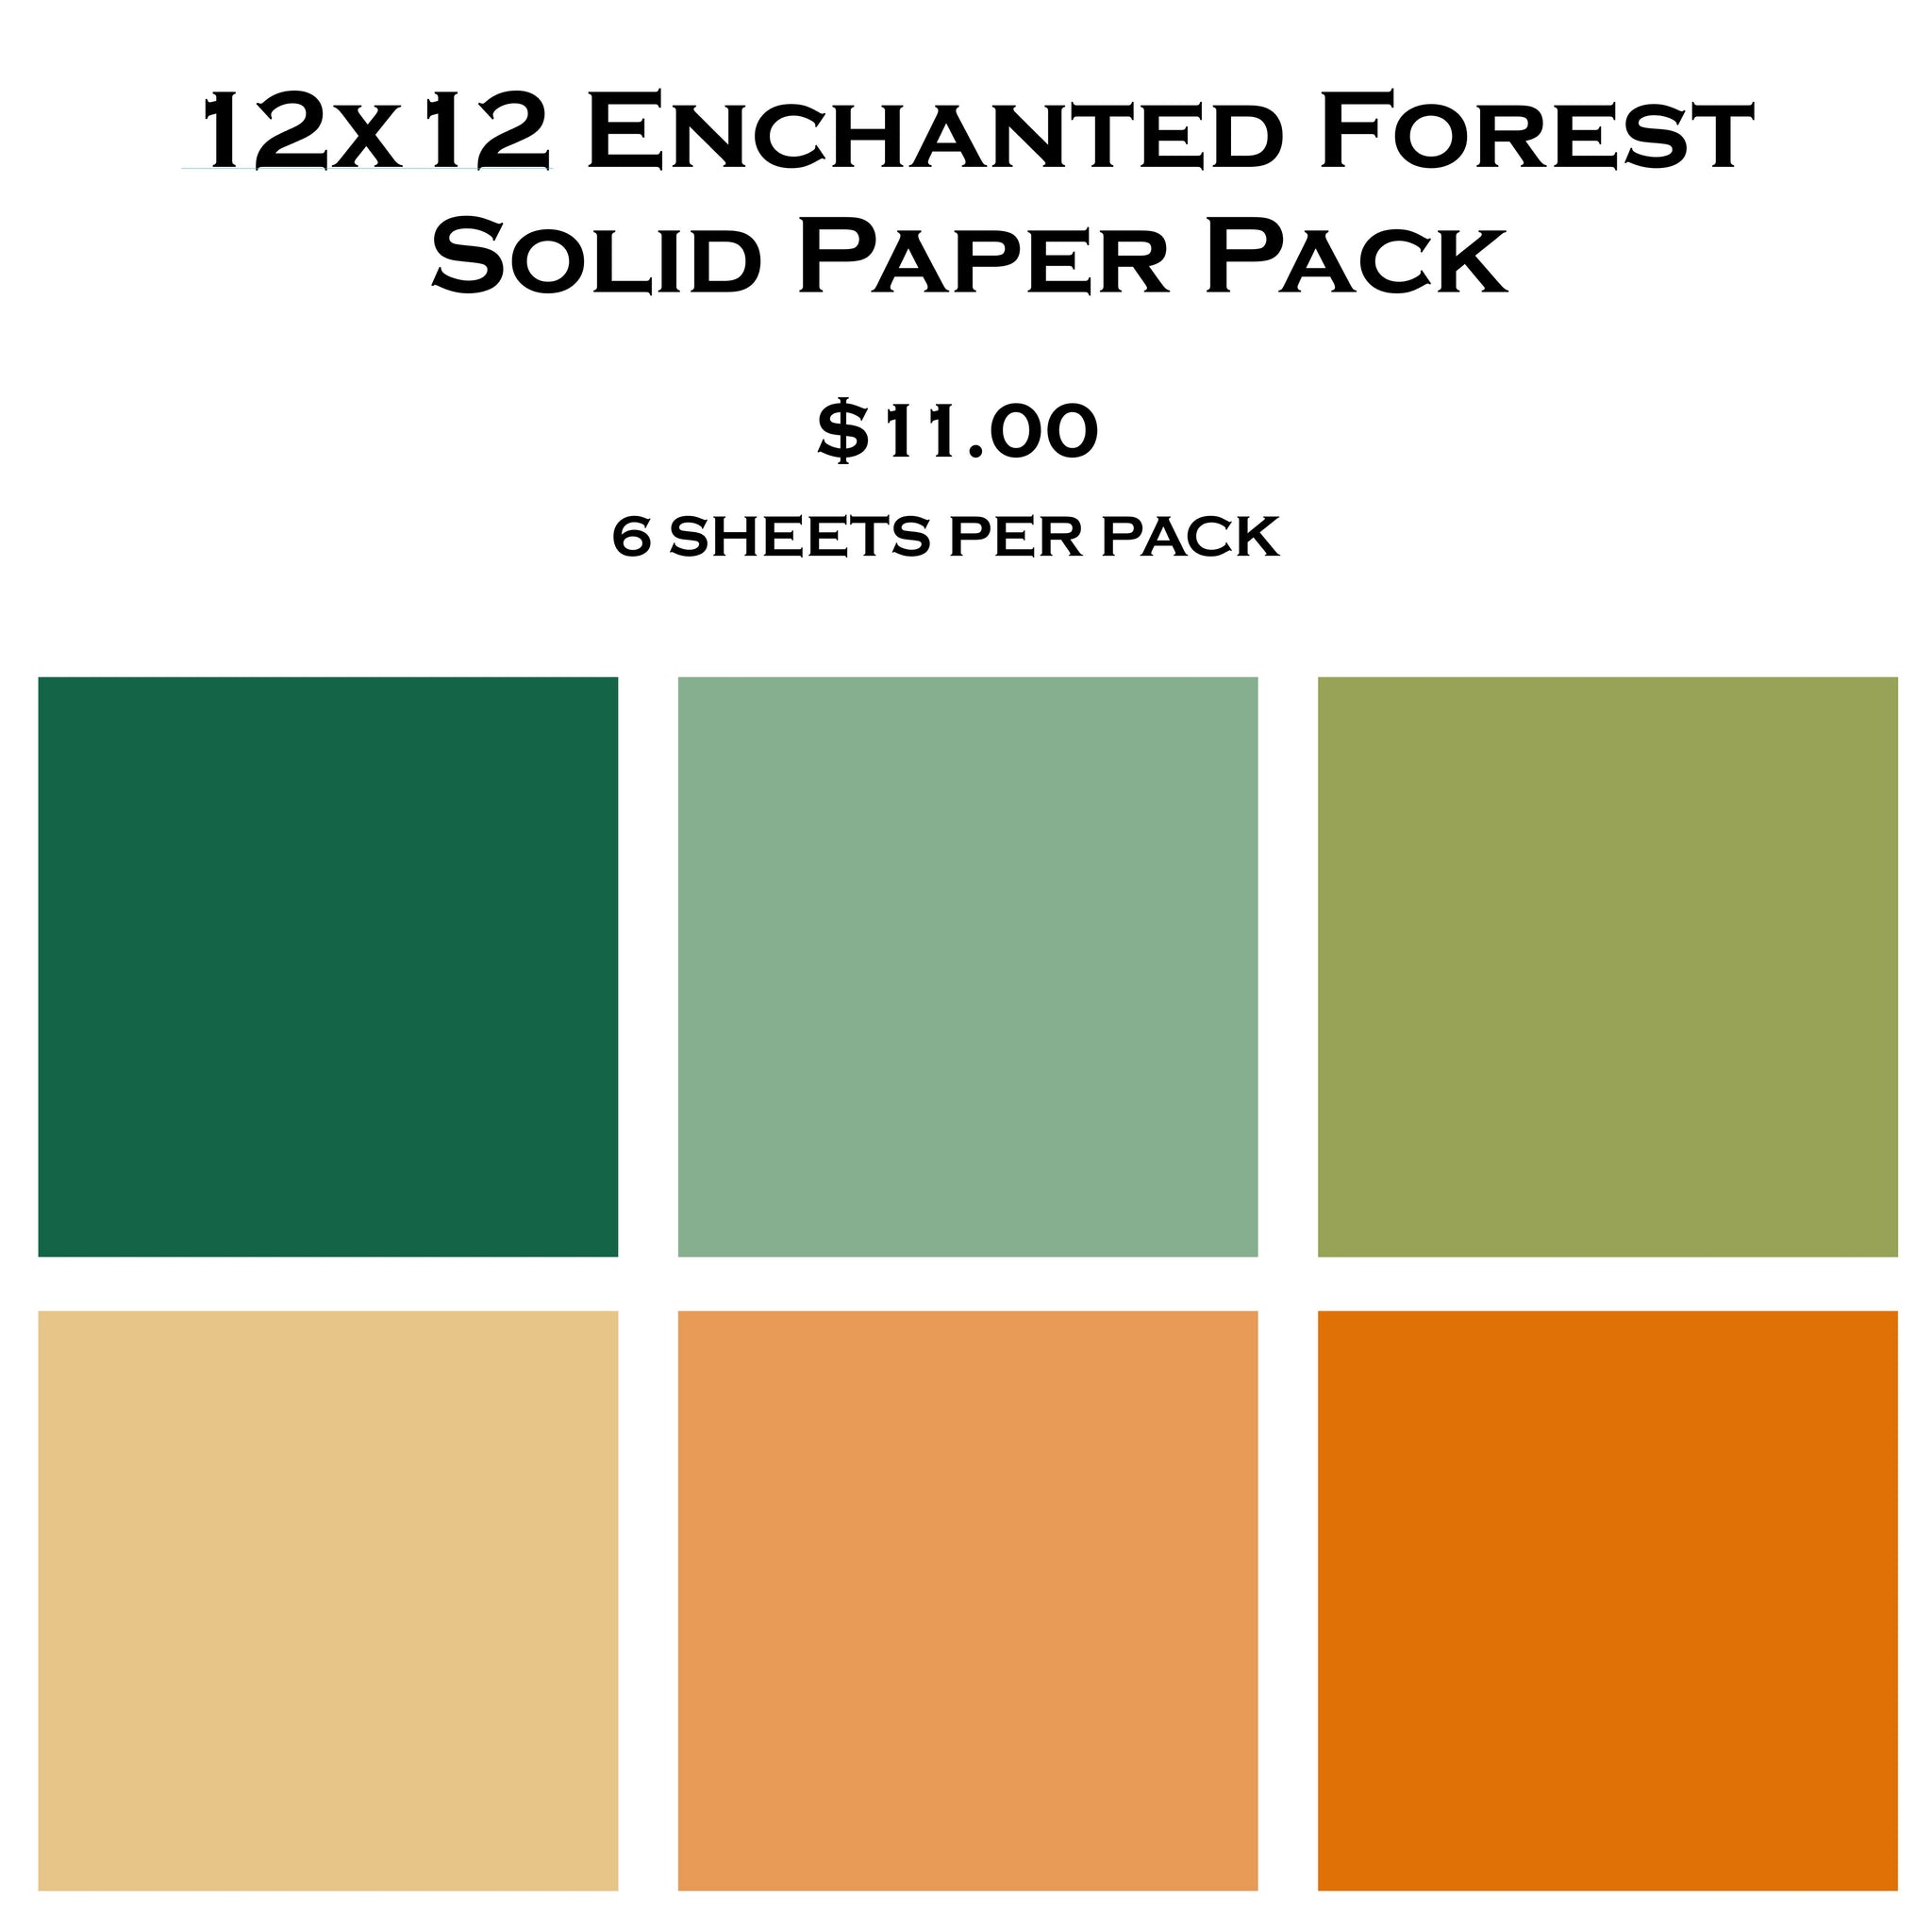 Enchanted Forest 12x12 Solid Paper Pack